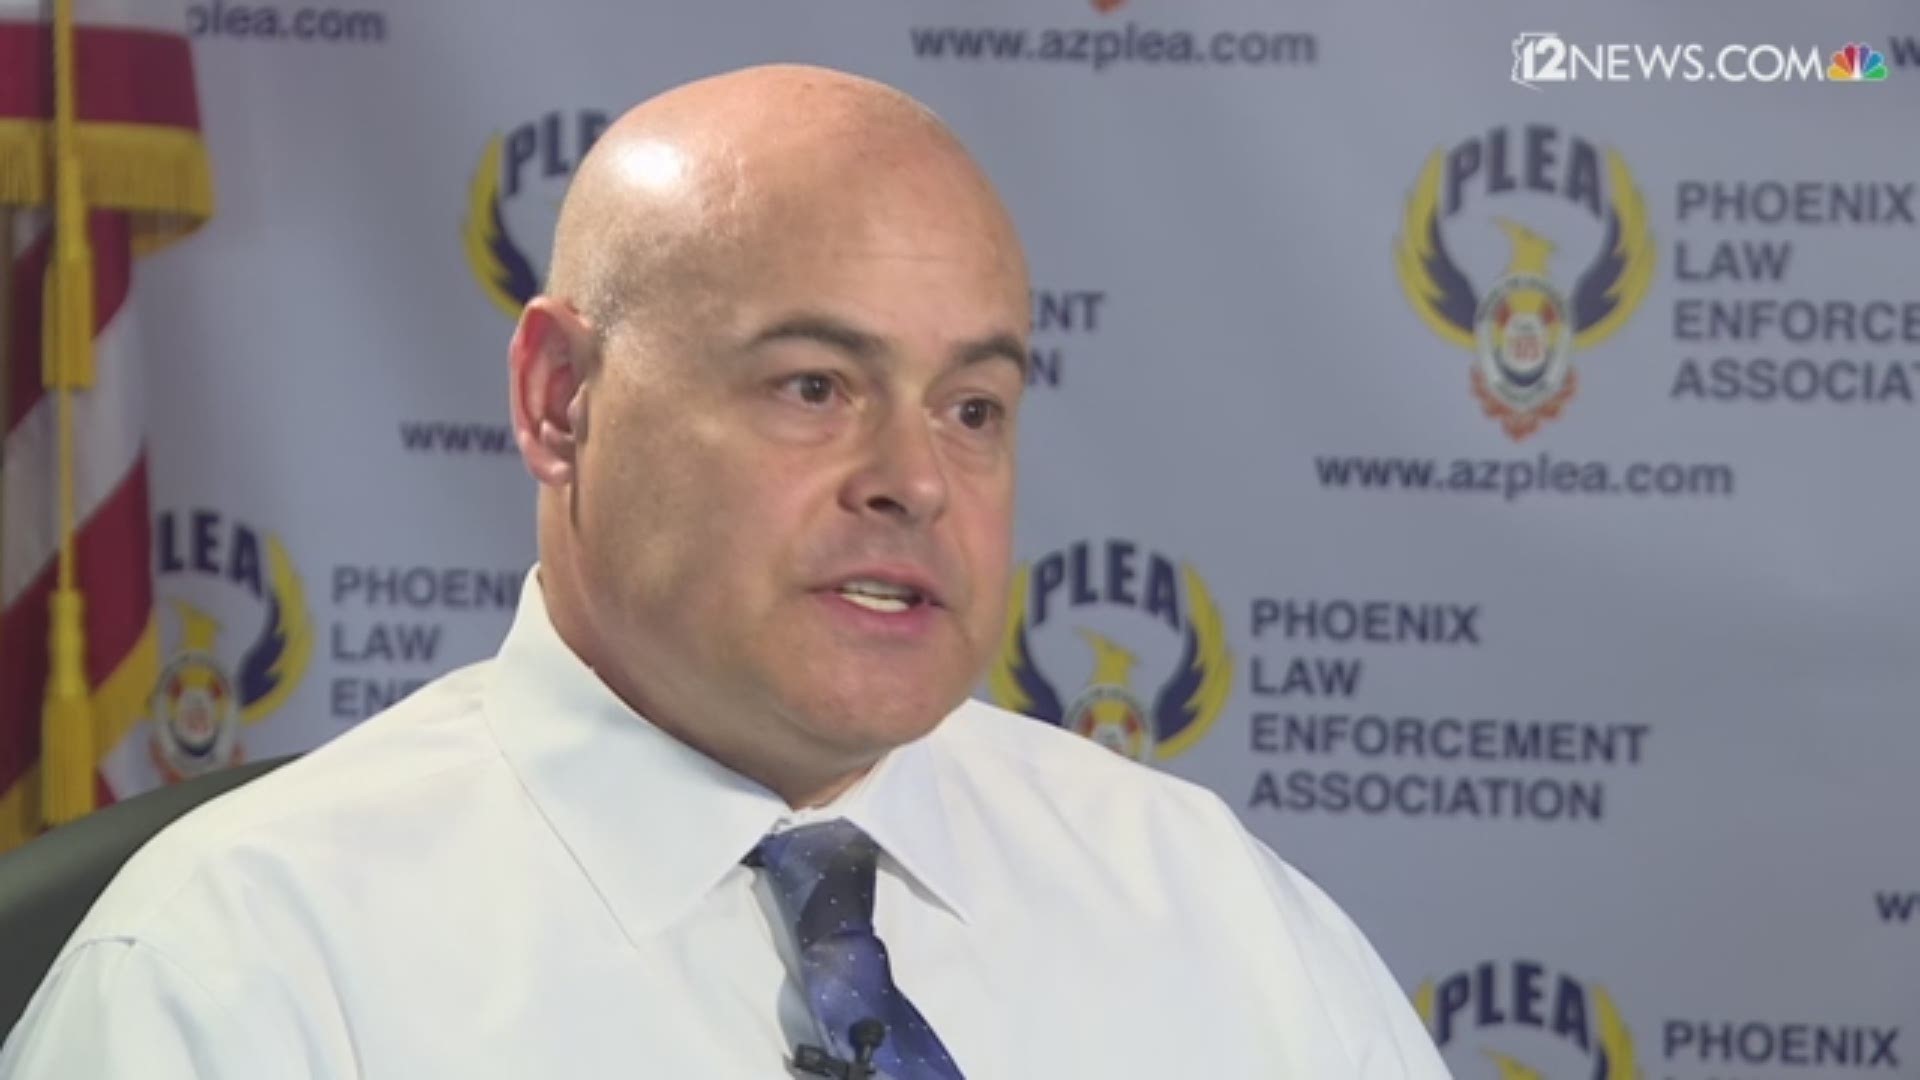 Britt London, president of PLEA, asked the public to be patient as all the facts surrounding a controversial police confrontation come to light.